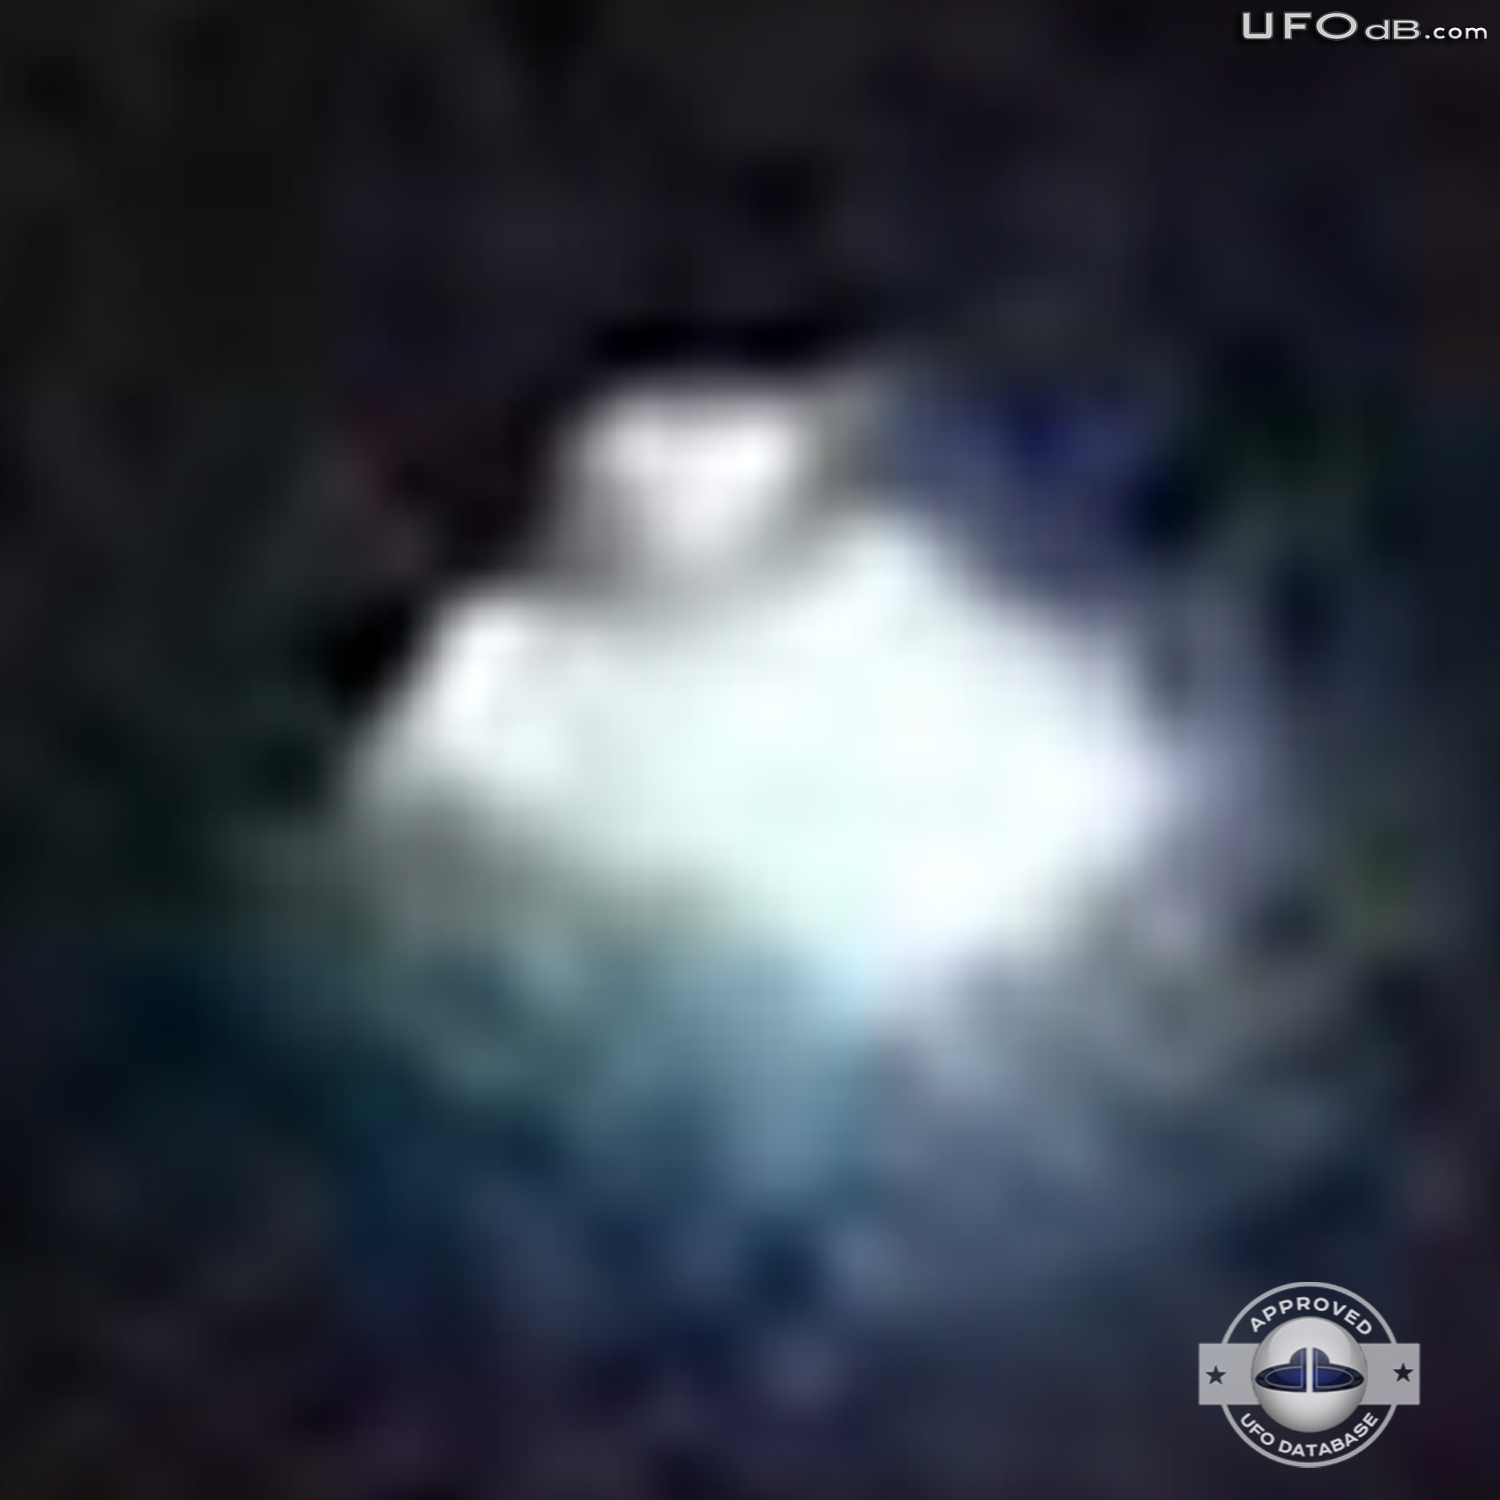 Moon picture captures bright white glowing UFO over a city in Ecuador UFO Picture #352-5